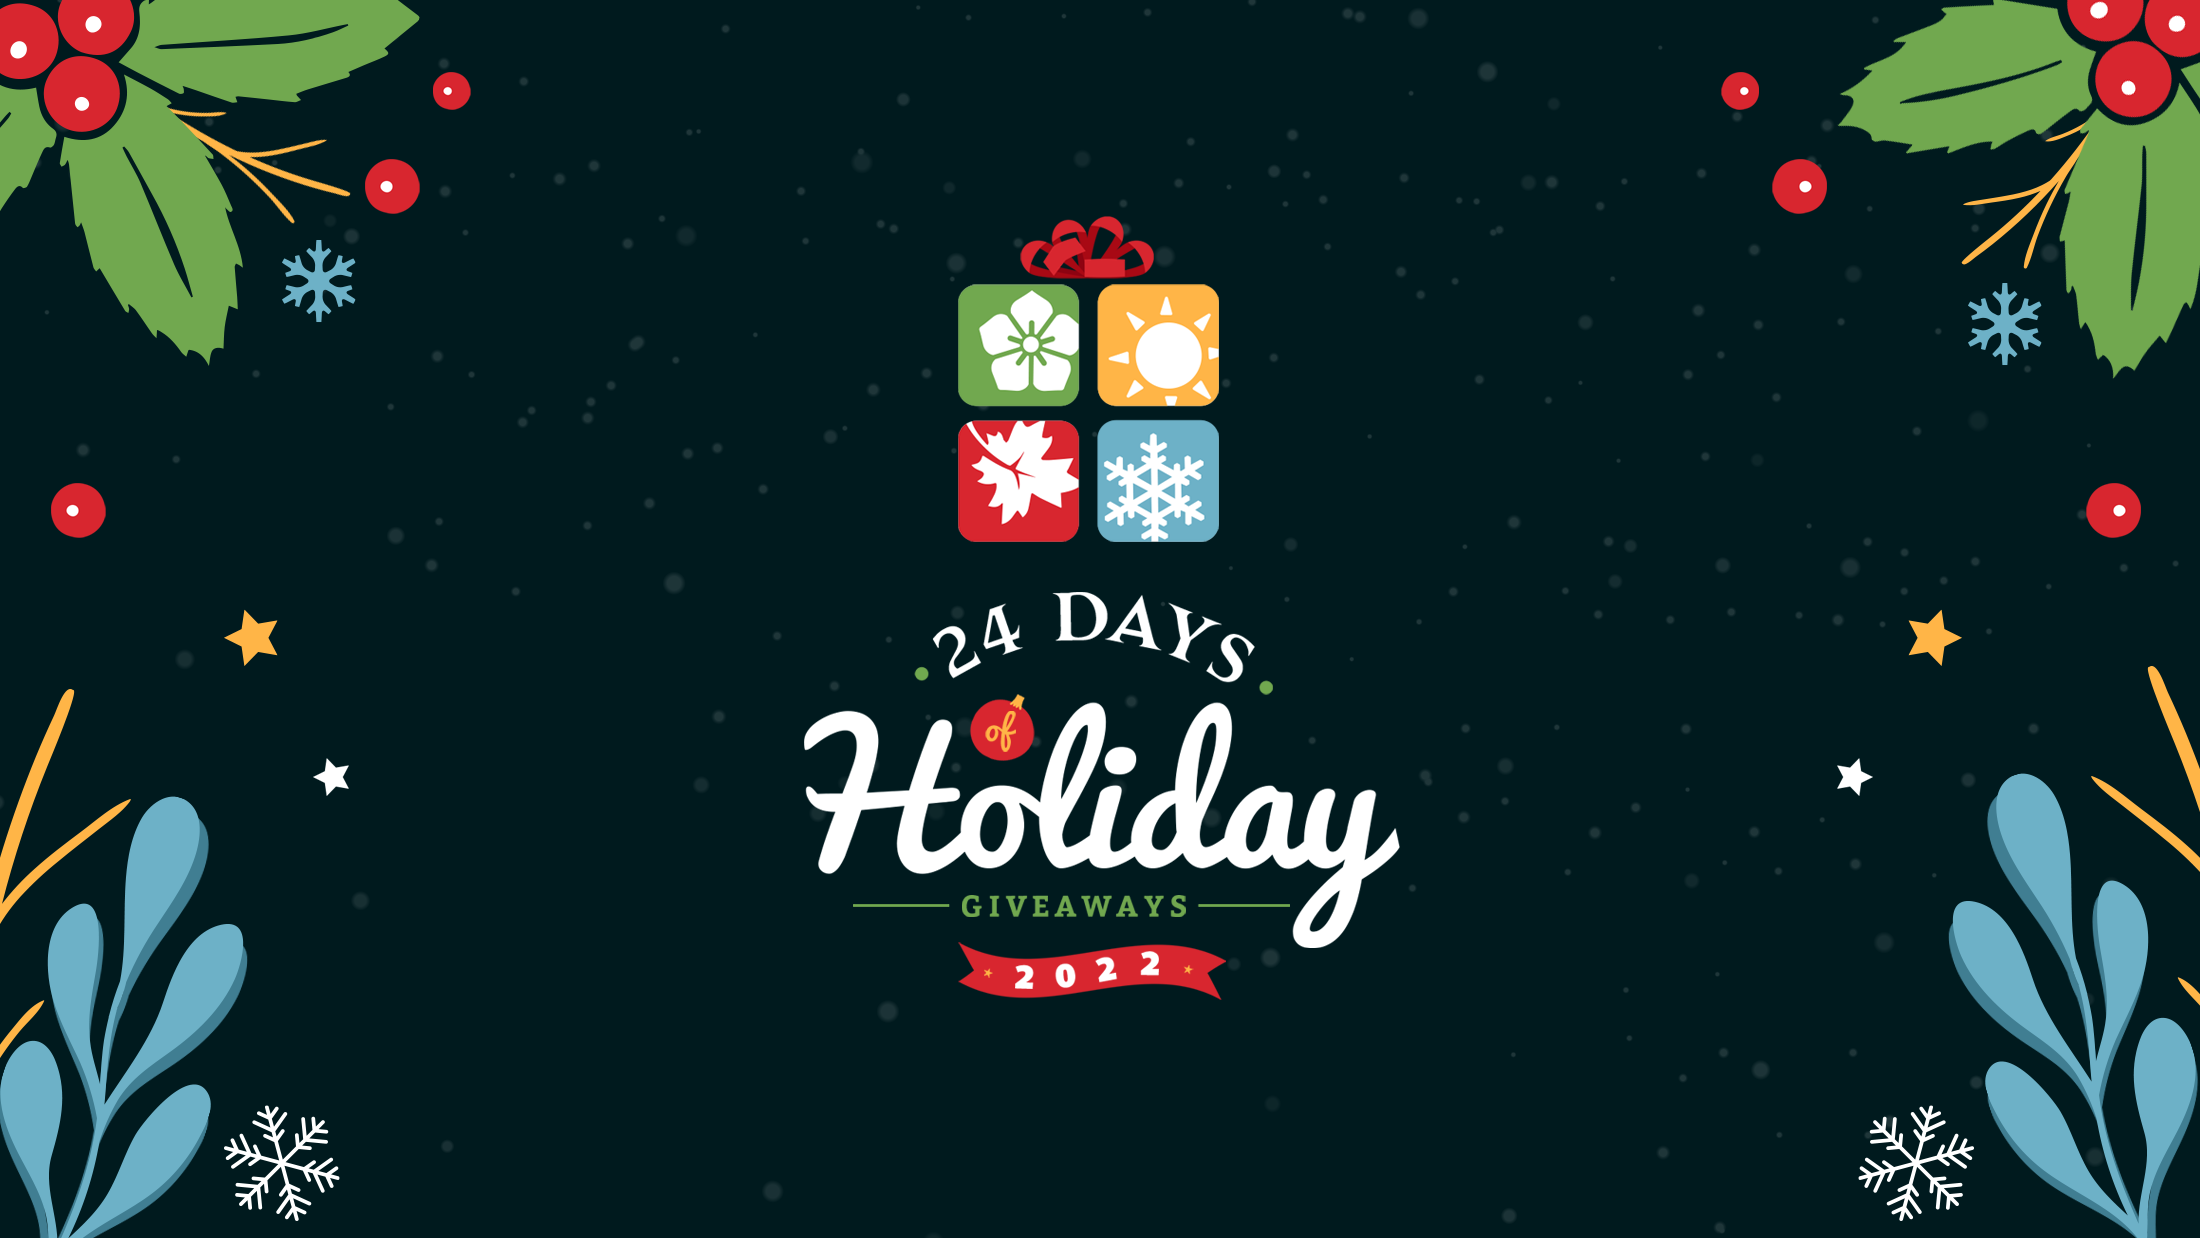 Penn Square Mall Holiday Shopping Guide + Giveaway! - The Double